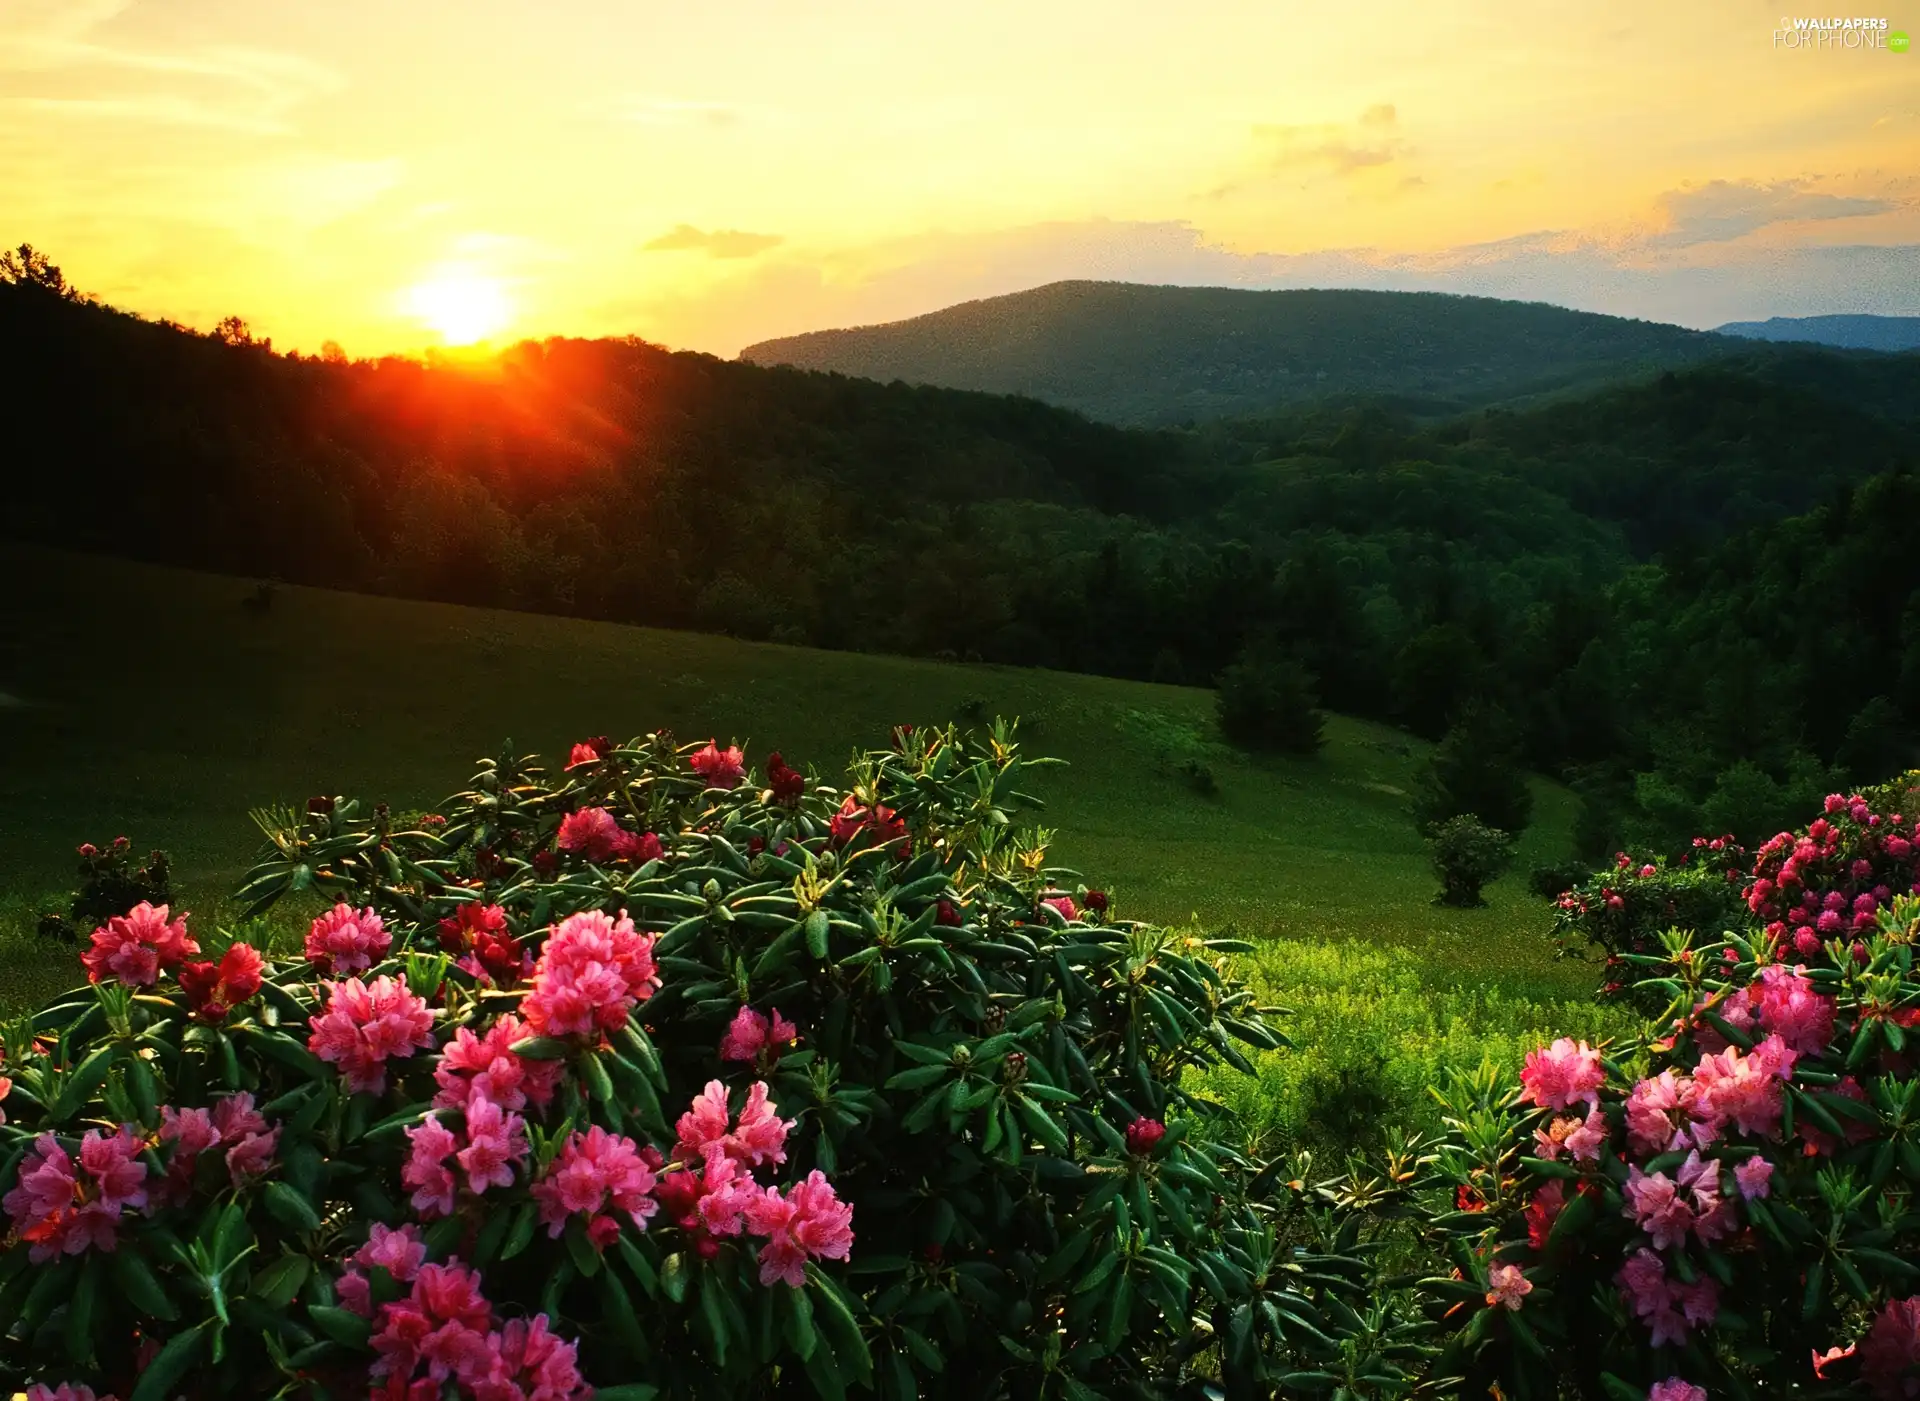 west, The Hills, Rhododendrons, sun